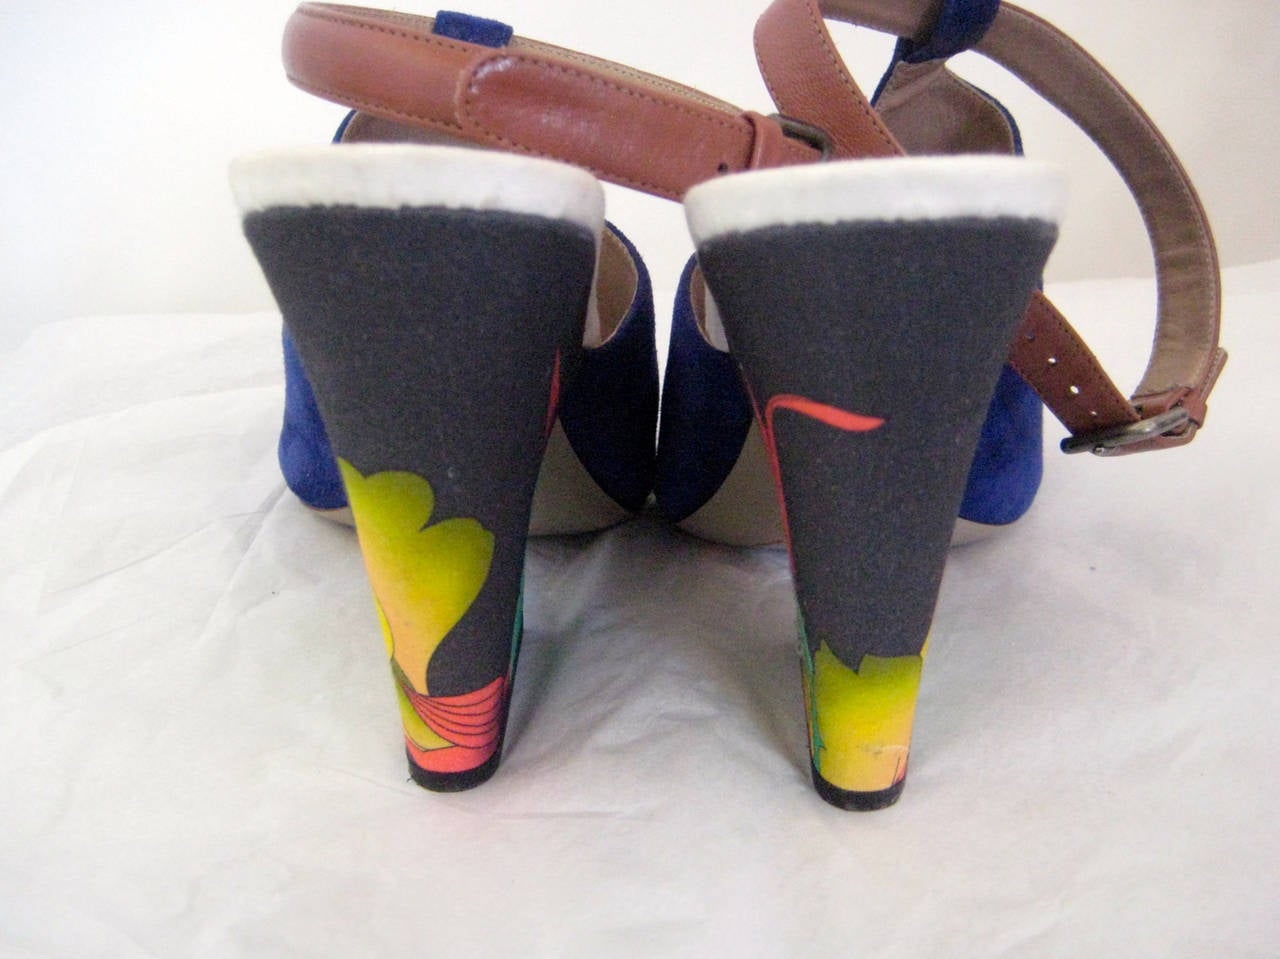 Gorgeous shoes from Dries Van Noten
Blue suede with ankle straps and silk floral heels
Excellent near mint ,these look as if they were worn very little if at all
Labeled size 40 1/2